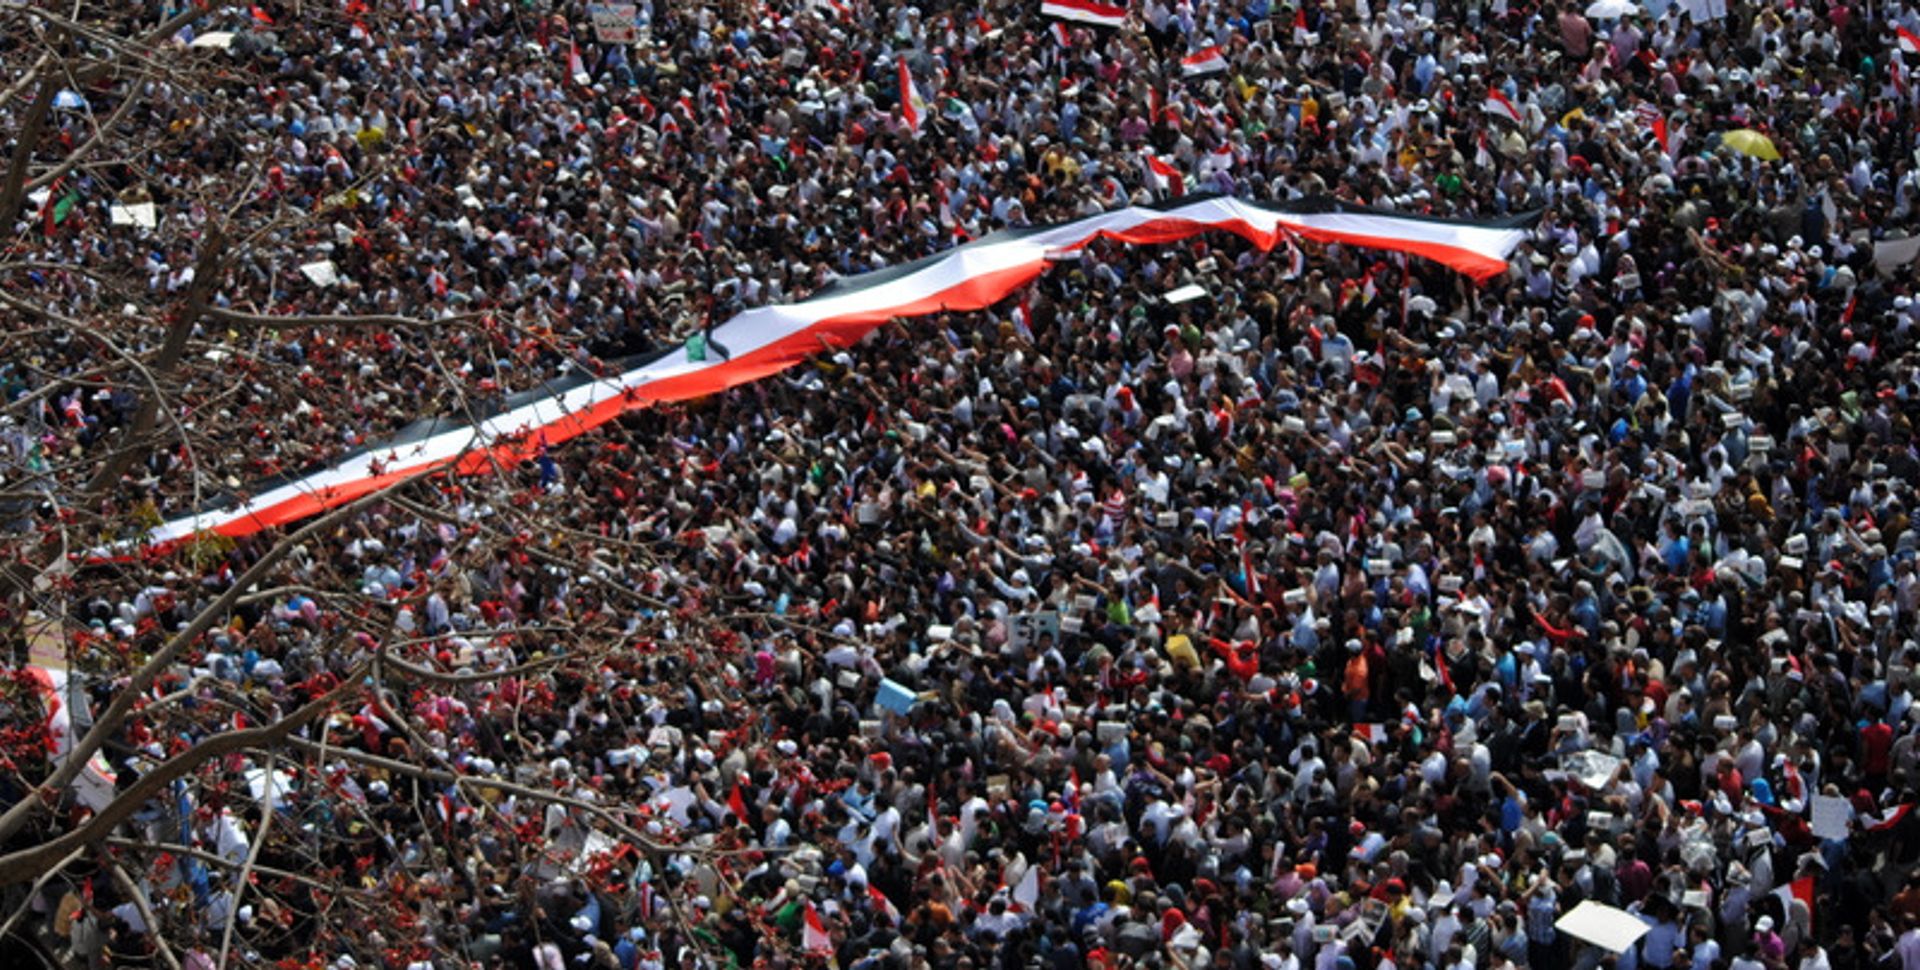 Protests in Tahrir Square, Cairo, on 1 April 2011. Photo: Lilian Wagdy Protests in Tahrir Square, Cairo, on 1 April 2011. Photo: Lilian Wagdy